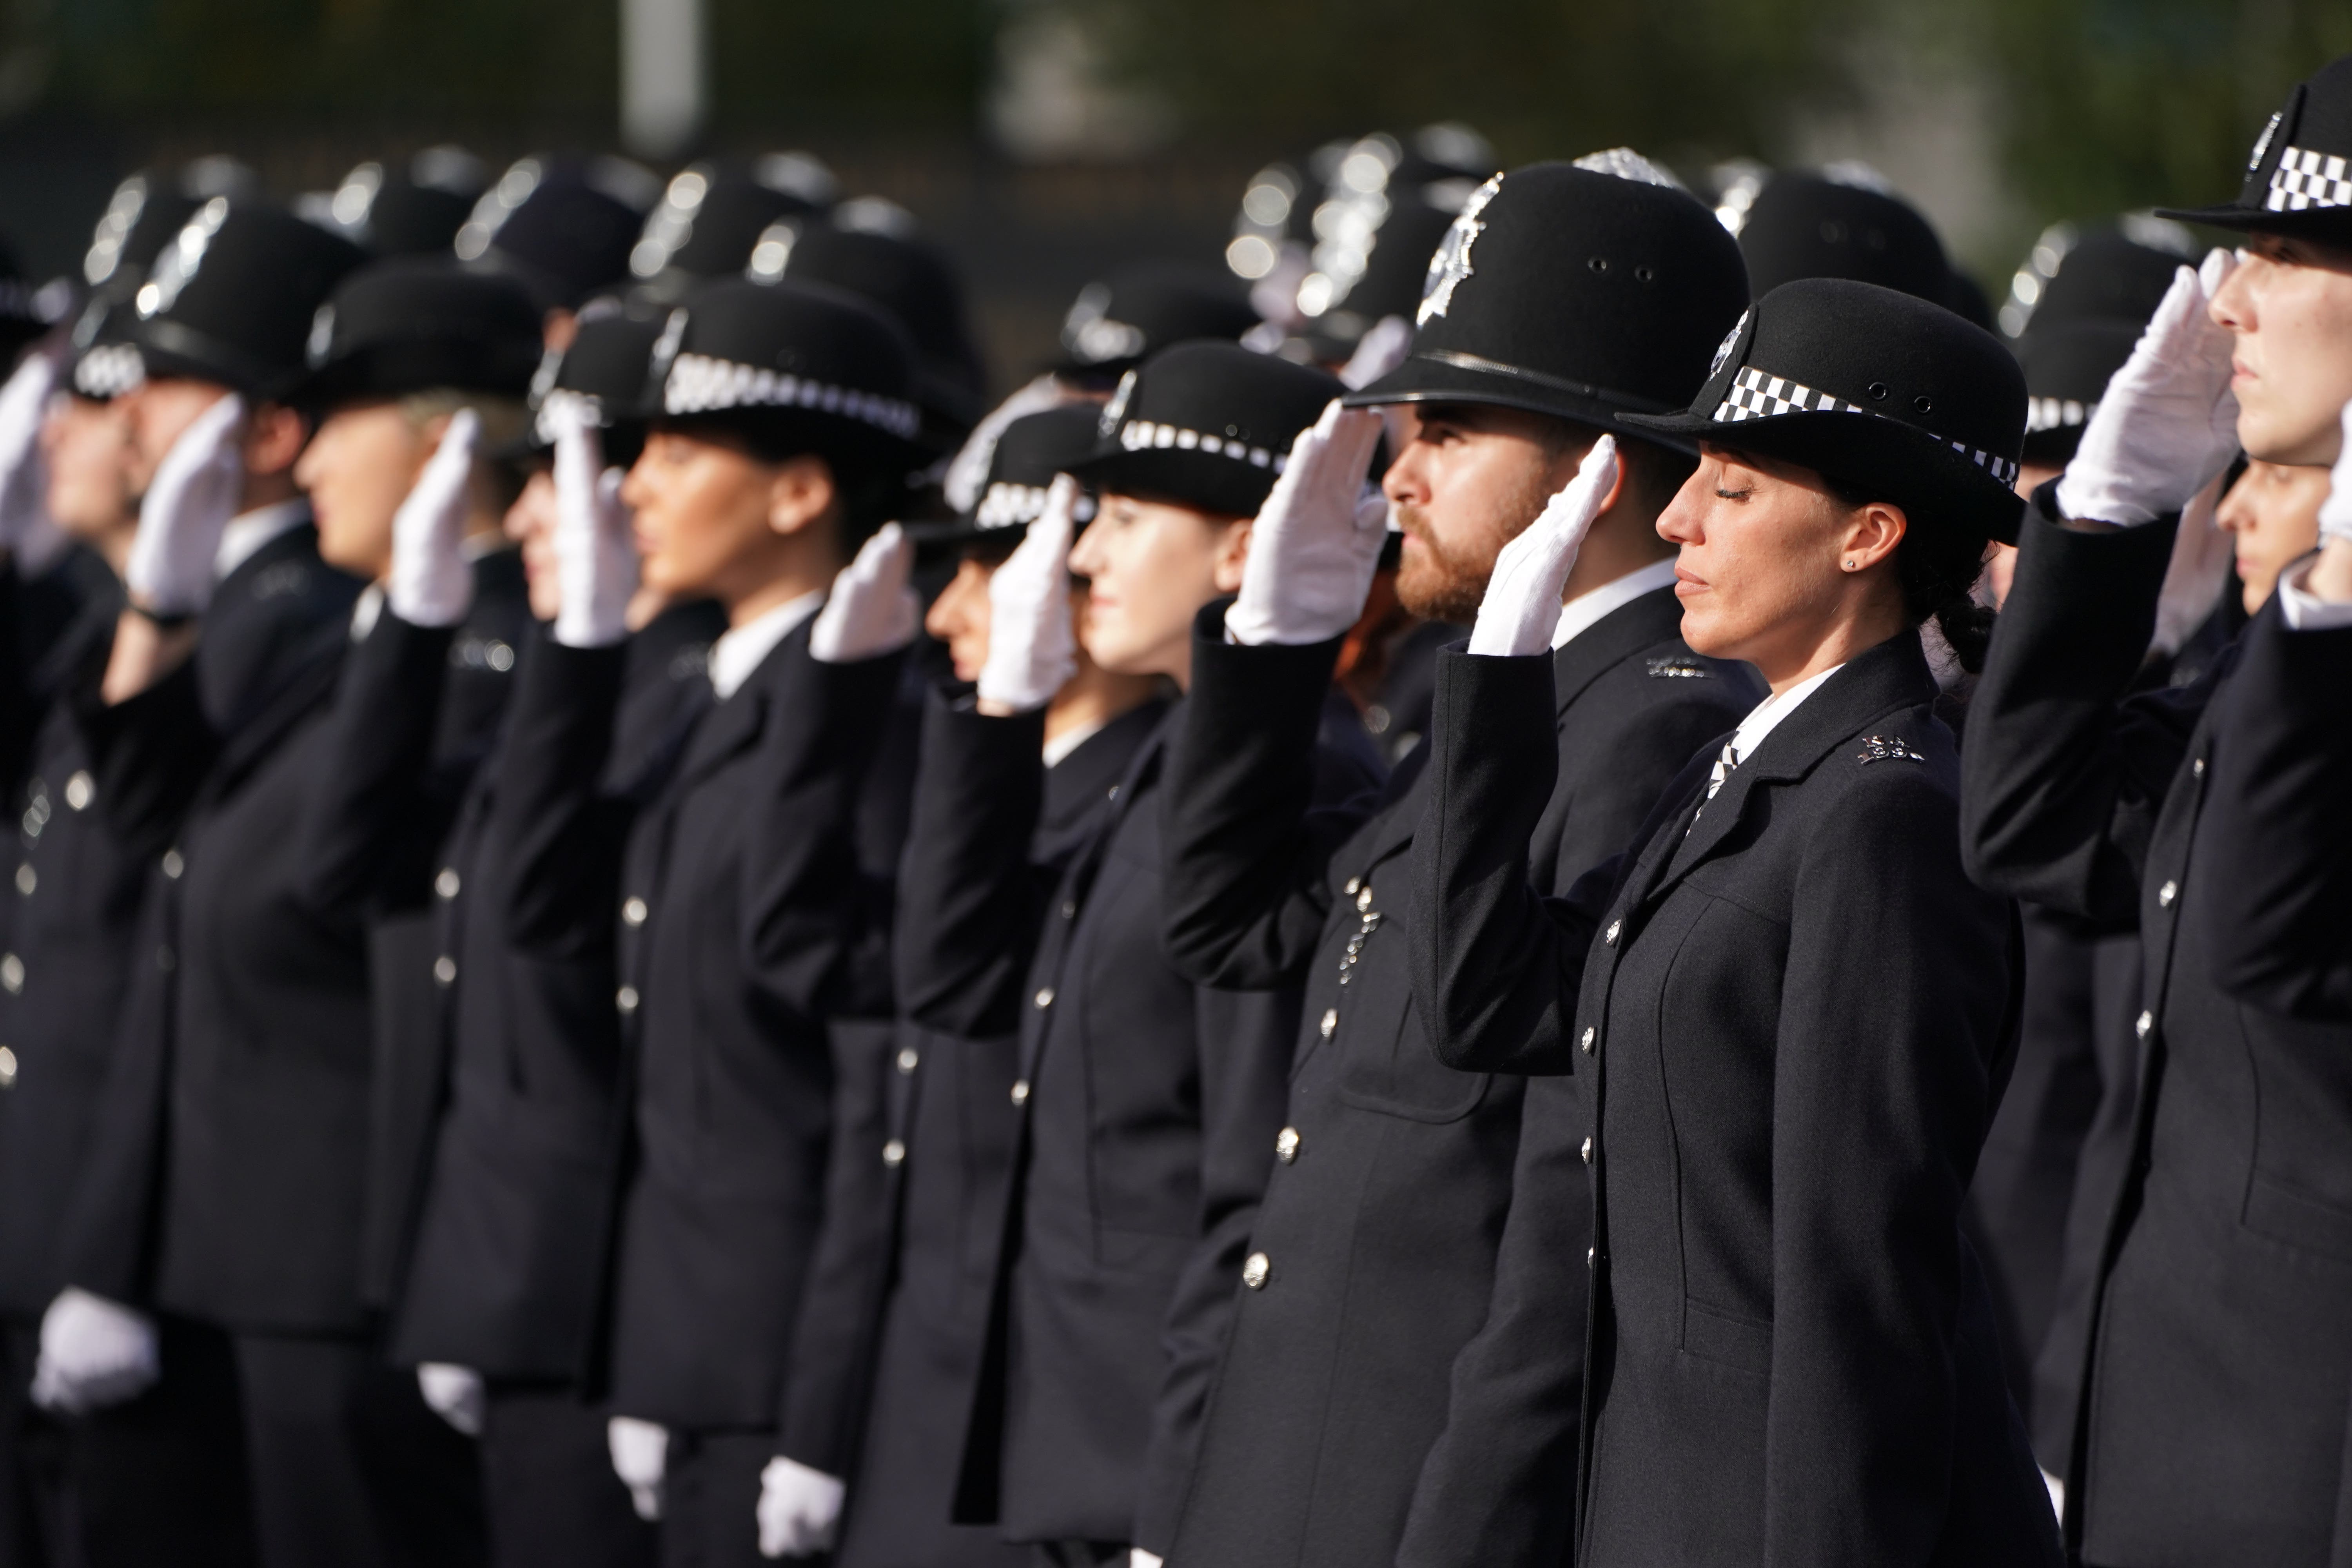 More than 20,000 new police officers have been hired in England and Wales